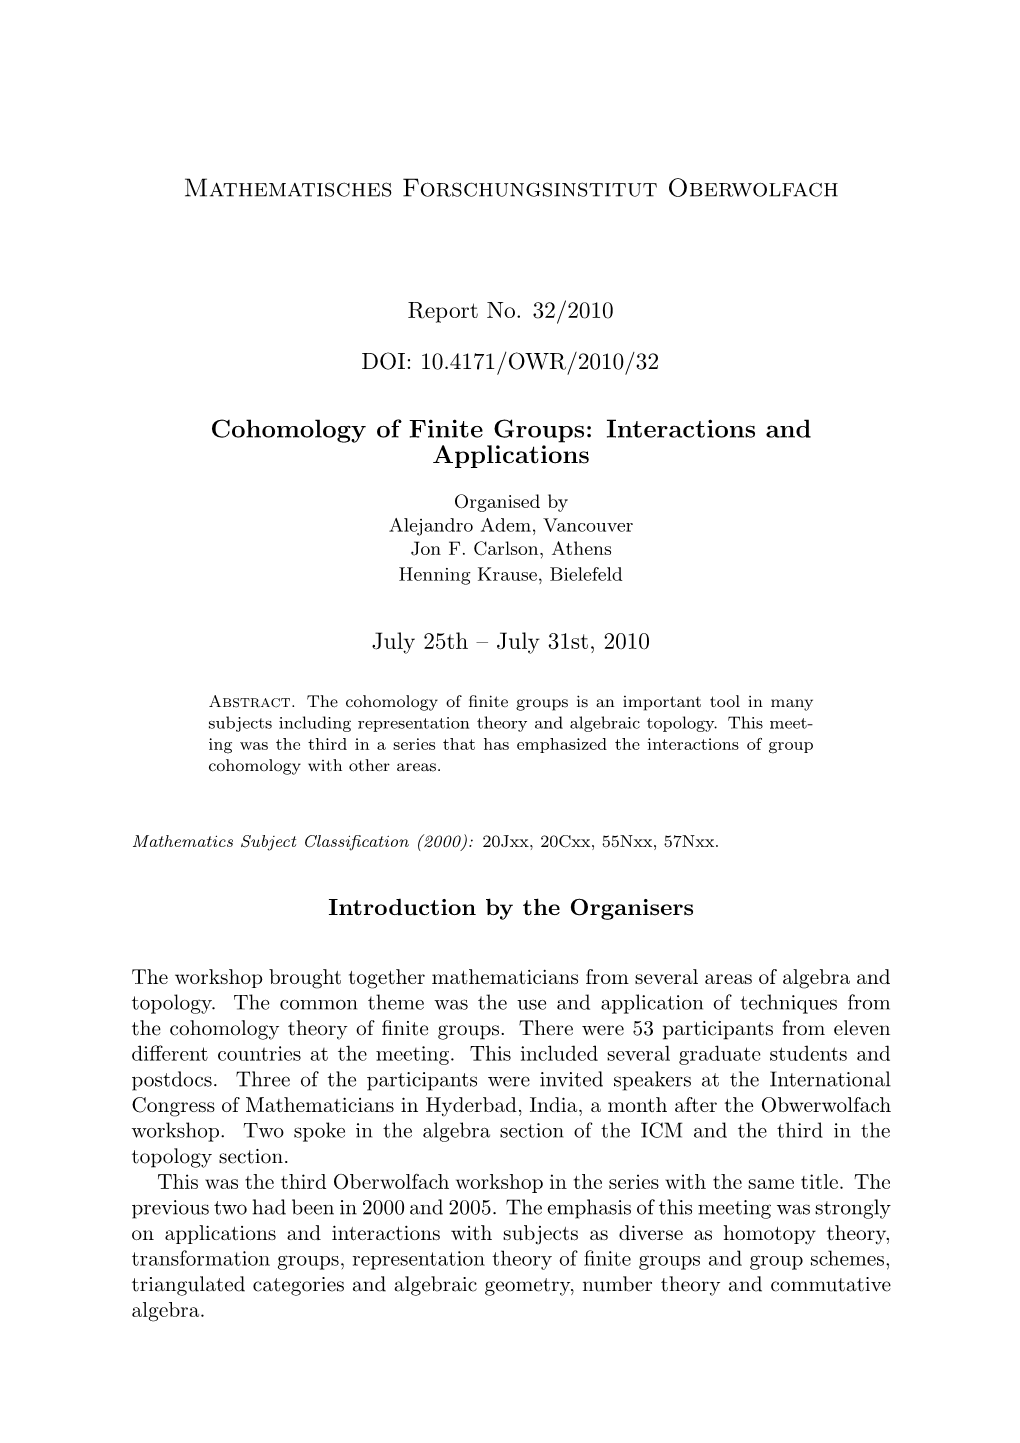 Cohomology of Finite Groups: Interactions and Applications